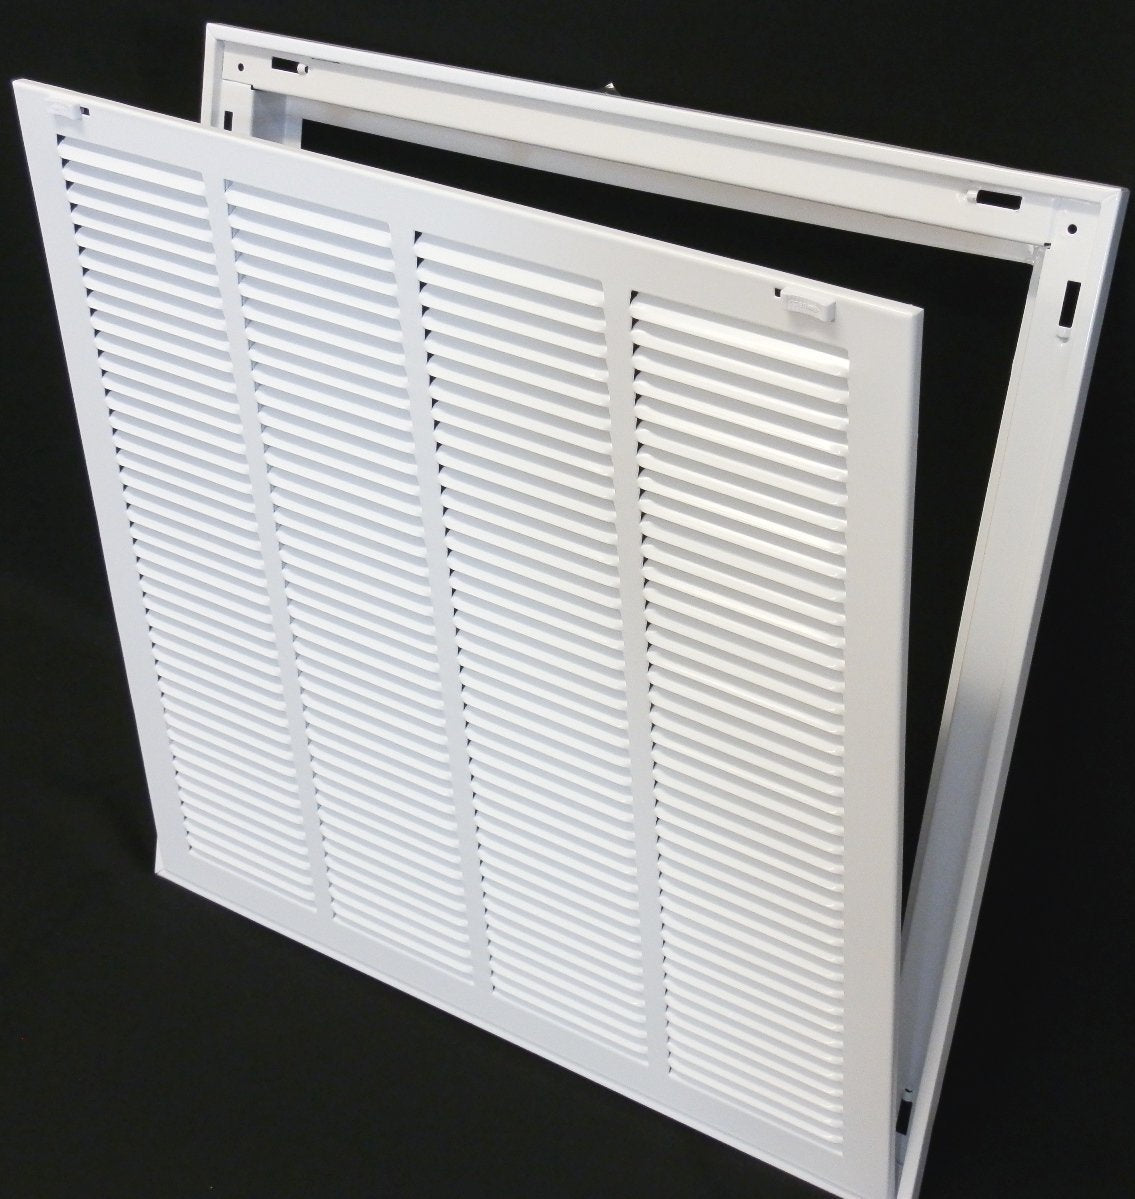 22&quot; X 32&quot; Steel Return Air Filter Grille for 1&quot; Filter - Removable Frame - [Outer Dimensions: 24 5/8&quot; X 34 5/8&quot;]